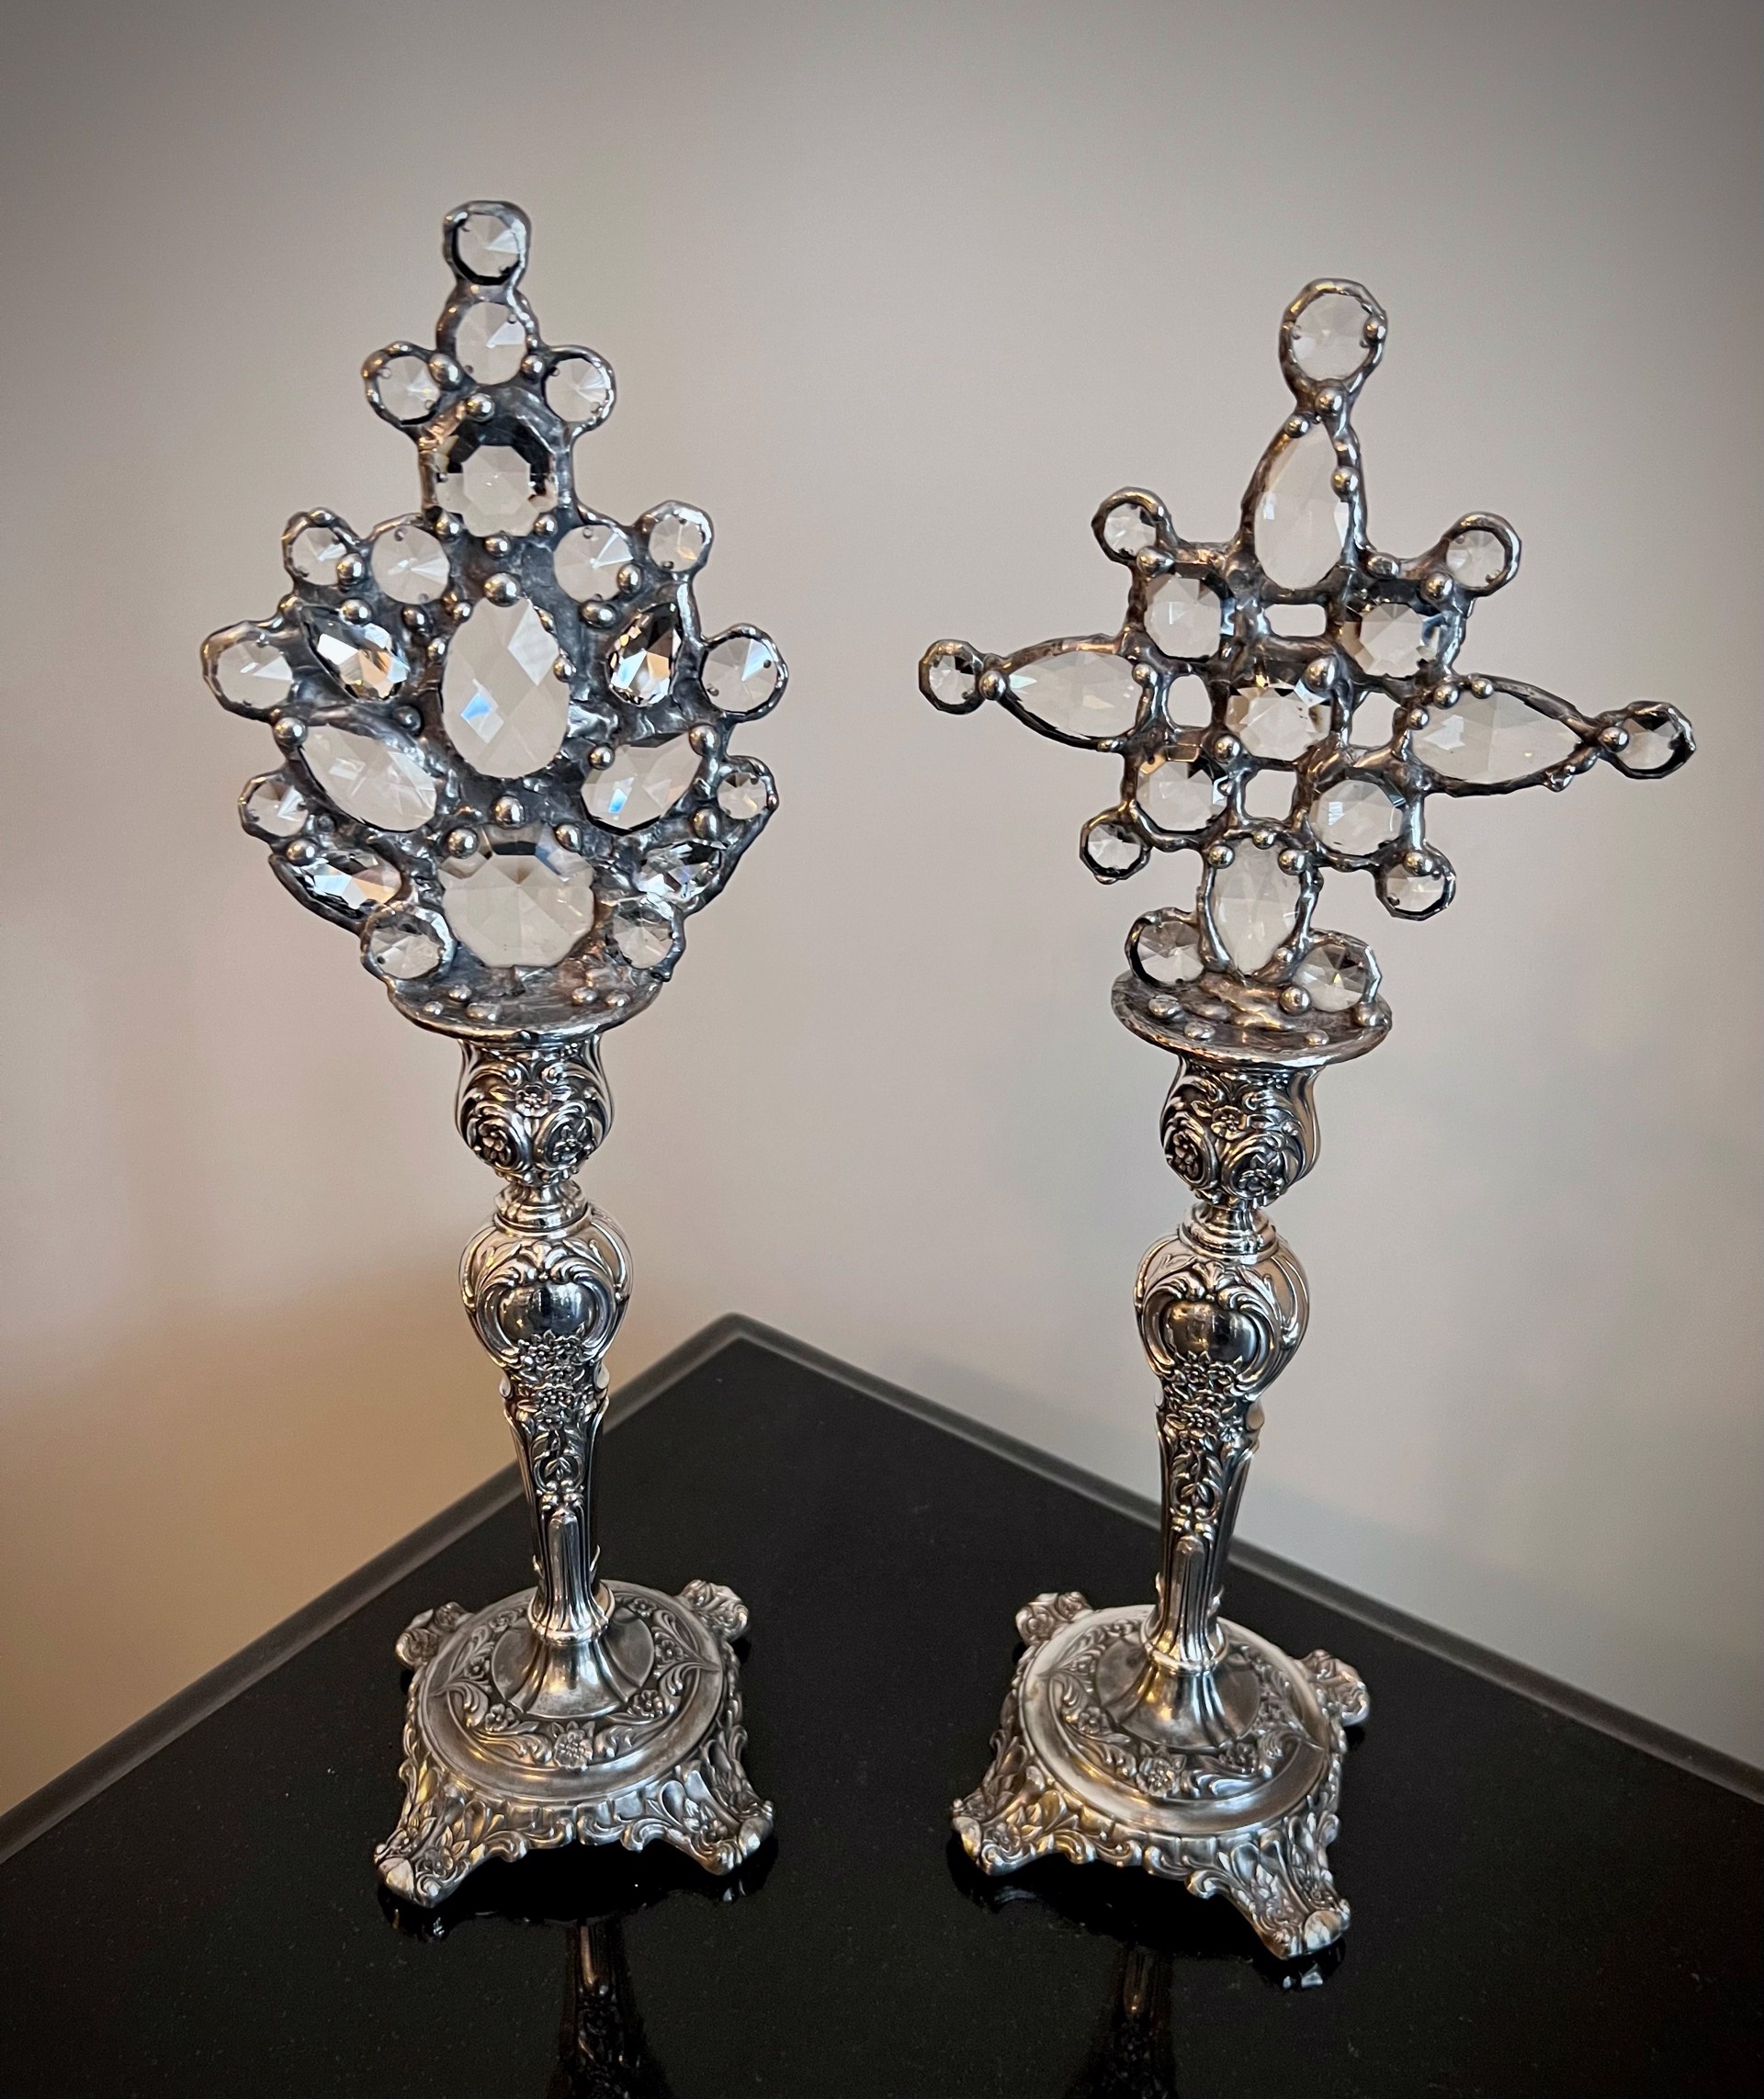 Crystals on 16-inch Antique Silver Candle Holders by Trinka 5 Designs